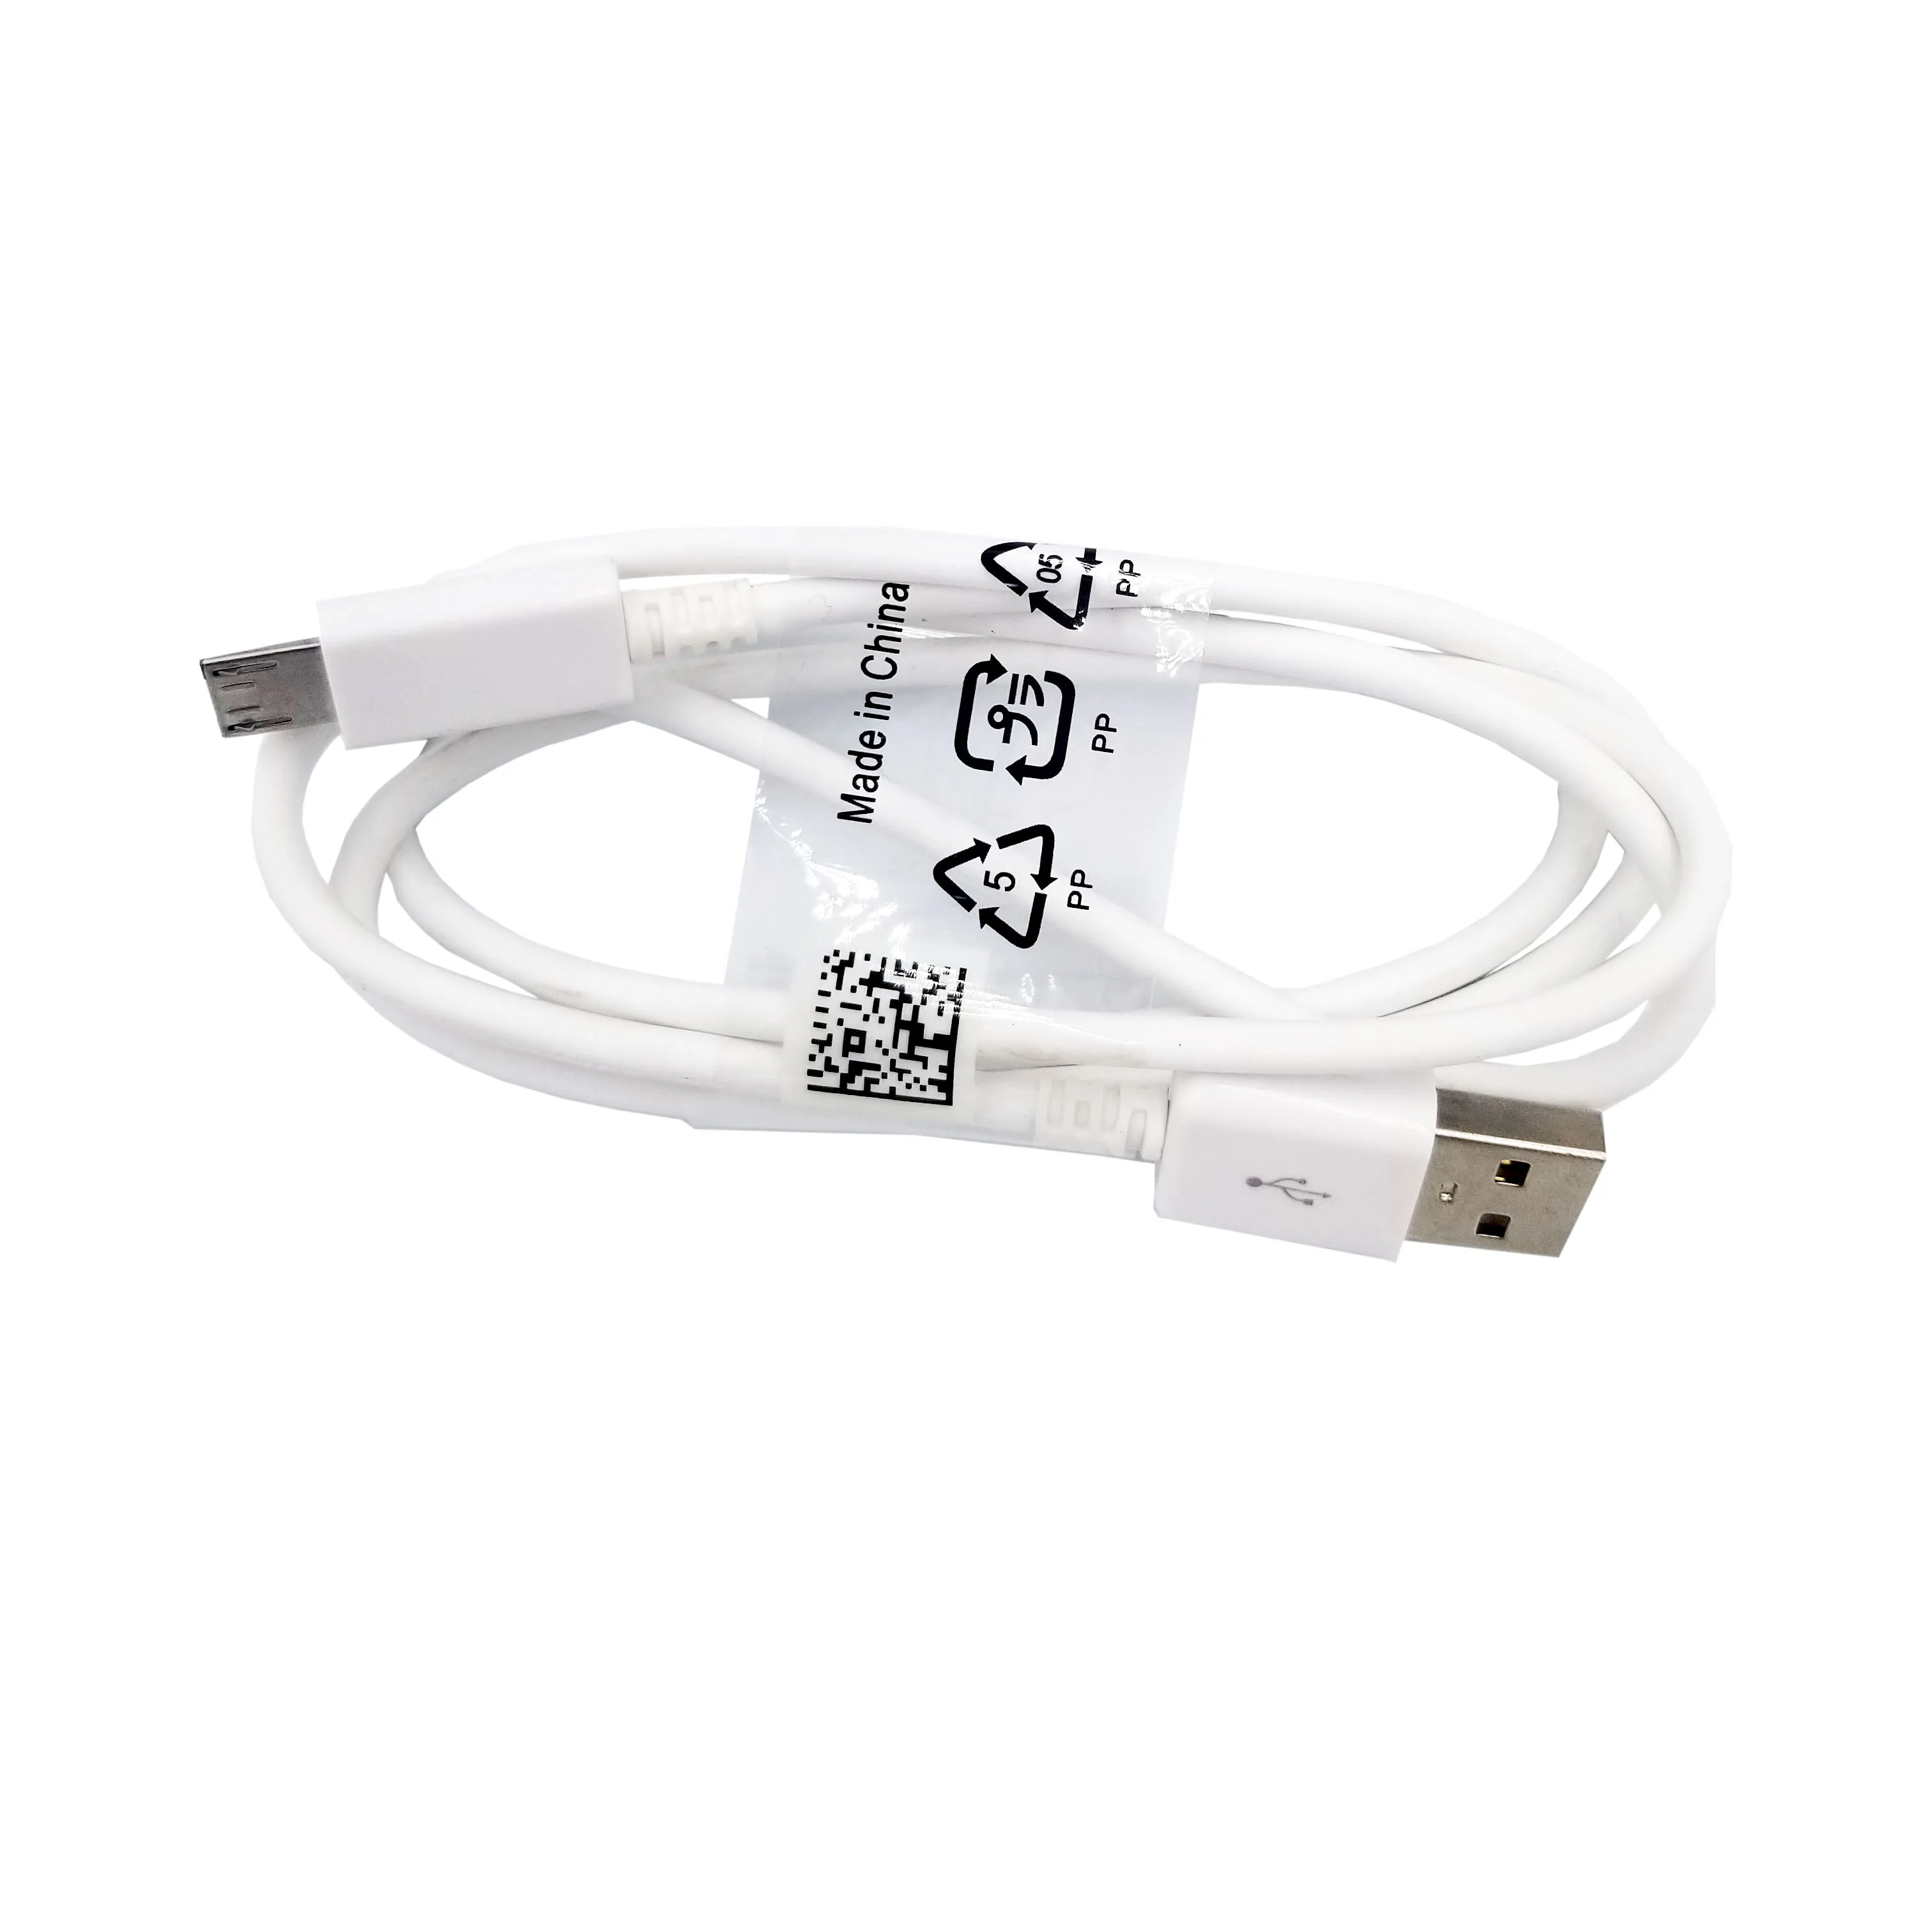 White high quality charging type high speed data transmission one meter short usb cable